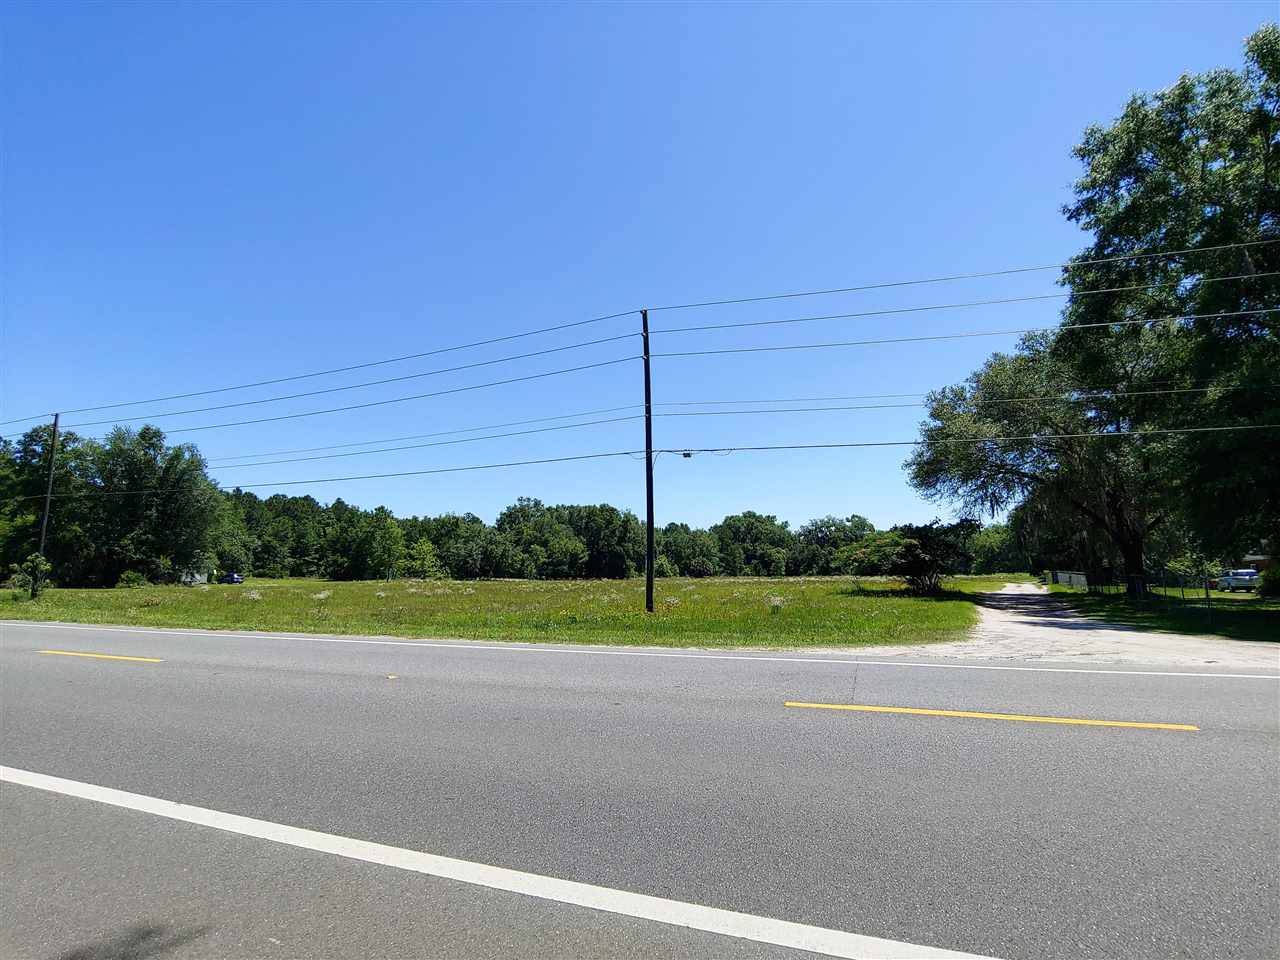 This 2.29 acres will be divided out of the current 4.29 acre parcel and will be the front portion of the current parcel which has 340 feet of road frontage on N US Hwy 221 and will be approximately 300' Deep. There is a 30' Easement on the Southern Boundary. This acreage is cleared and has established grasses.  This property is located next to the Graves Drive-In Restaurant.  Property is Zoned Mixed Use - Urban Development. Must get permission before walking or driving on the property.